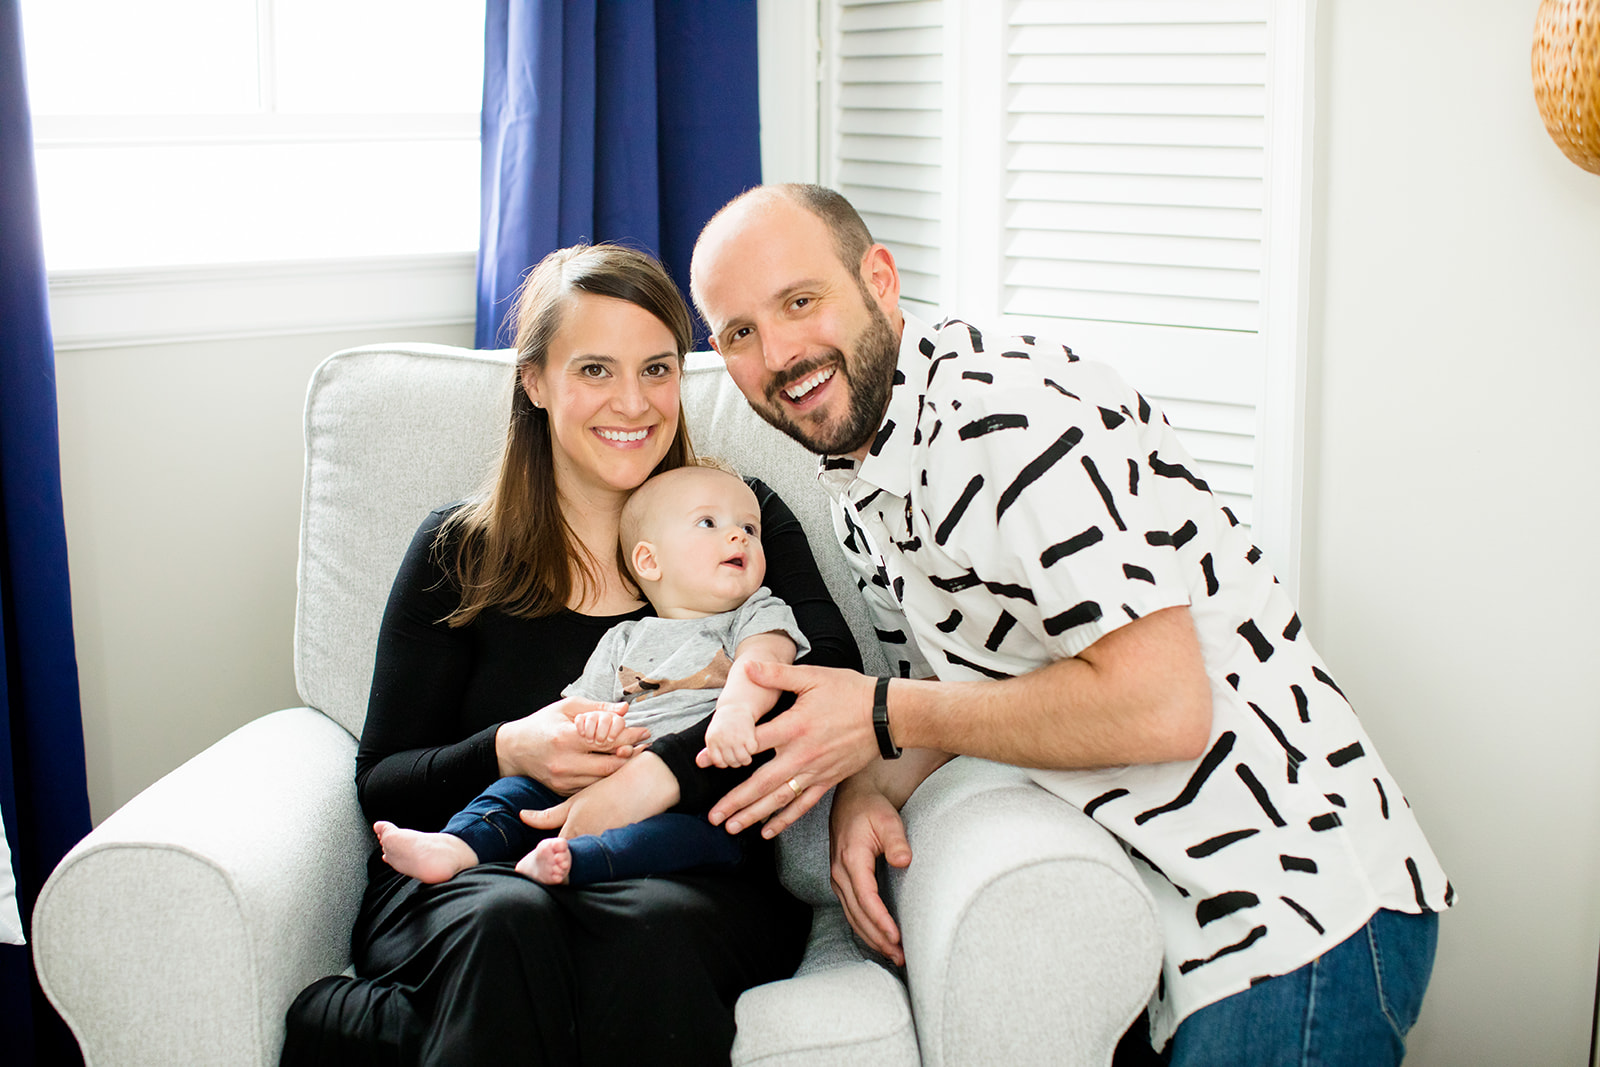 Richmond Va Lifestyle Family Photo Shoot with a Six Month Old - Image Property of www.j-dphoto.com